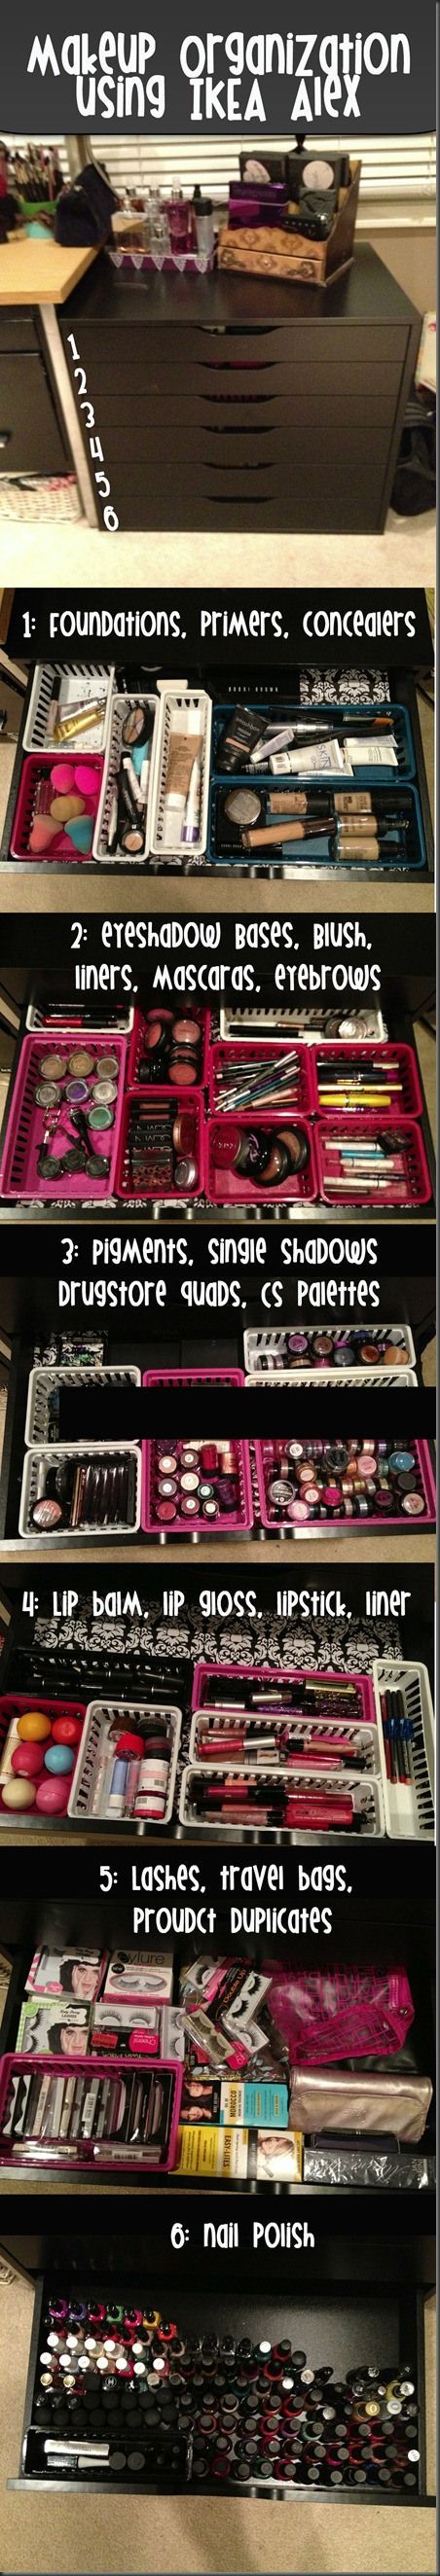 Makeup organization using IKEA   @Jenny Overfield if you like this idea we could